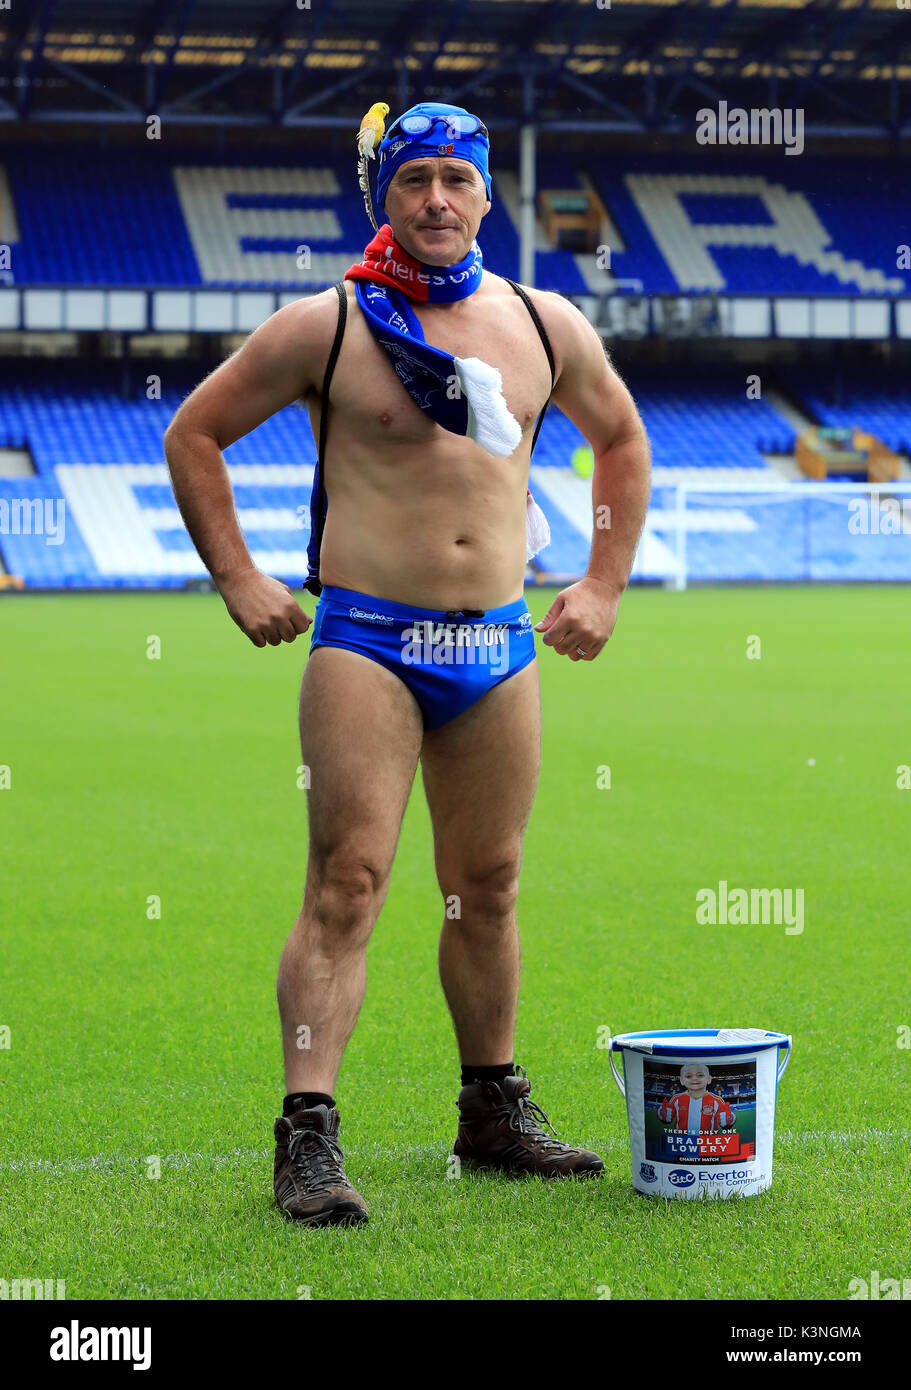 Michael Cullen aka Speedo Mick during the Bradley Lowery charity match at  Goodison Park, Liverpool. PRESS ASSOCIATION Photo. Picture date: Sunday  September 3, 2017. See PA story SOCCER Lowery. Photo credit should